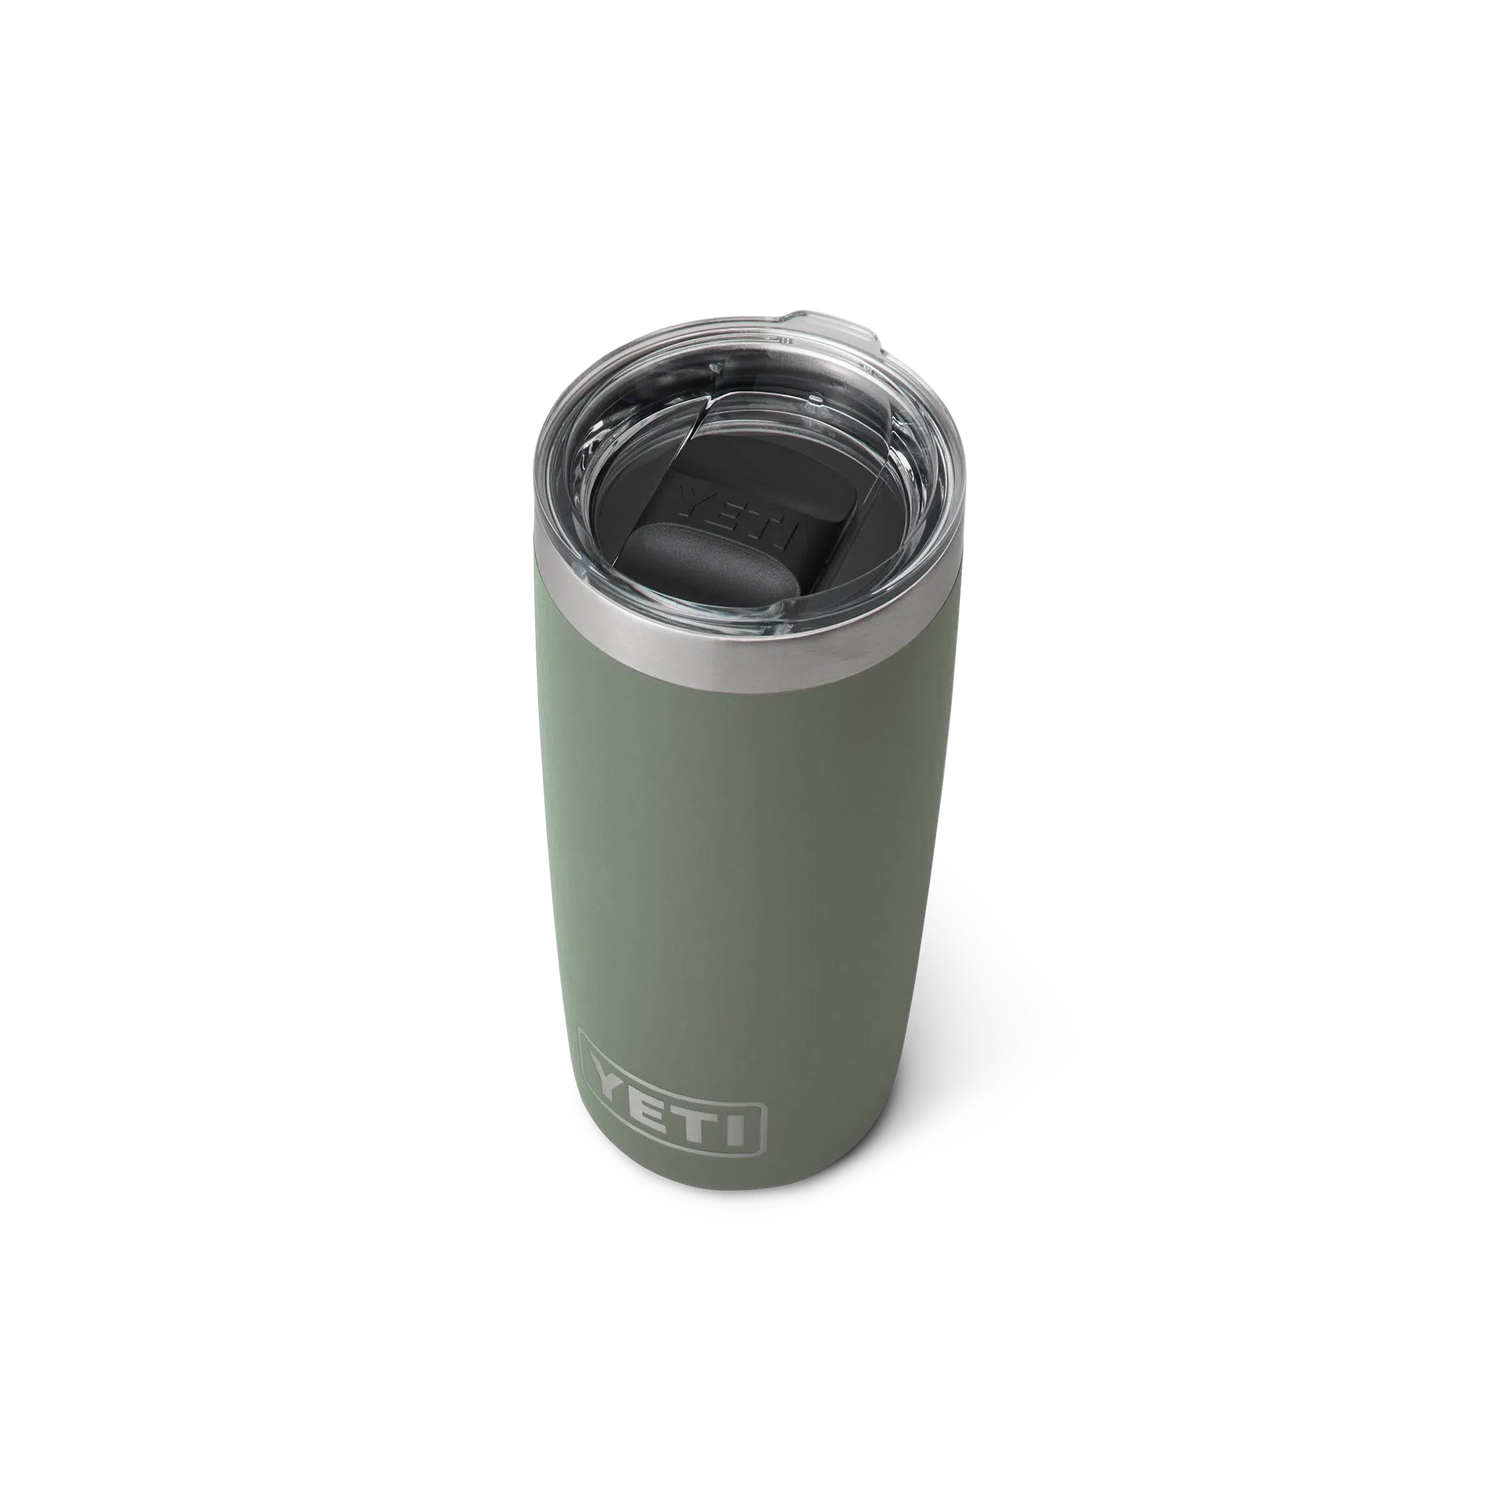 Yeti Tumbler 10oz (295ml) with Magslider Lid-Coolers & Drinkware-Yeti-Camp Green-Fishing Station